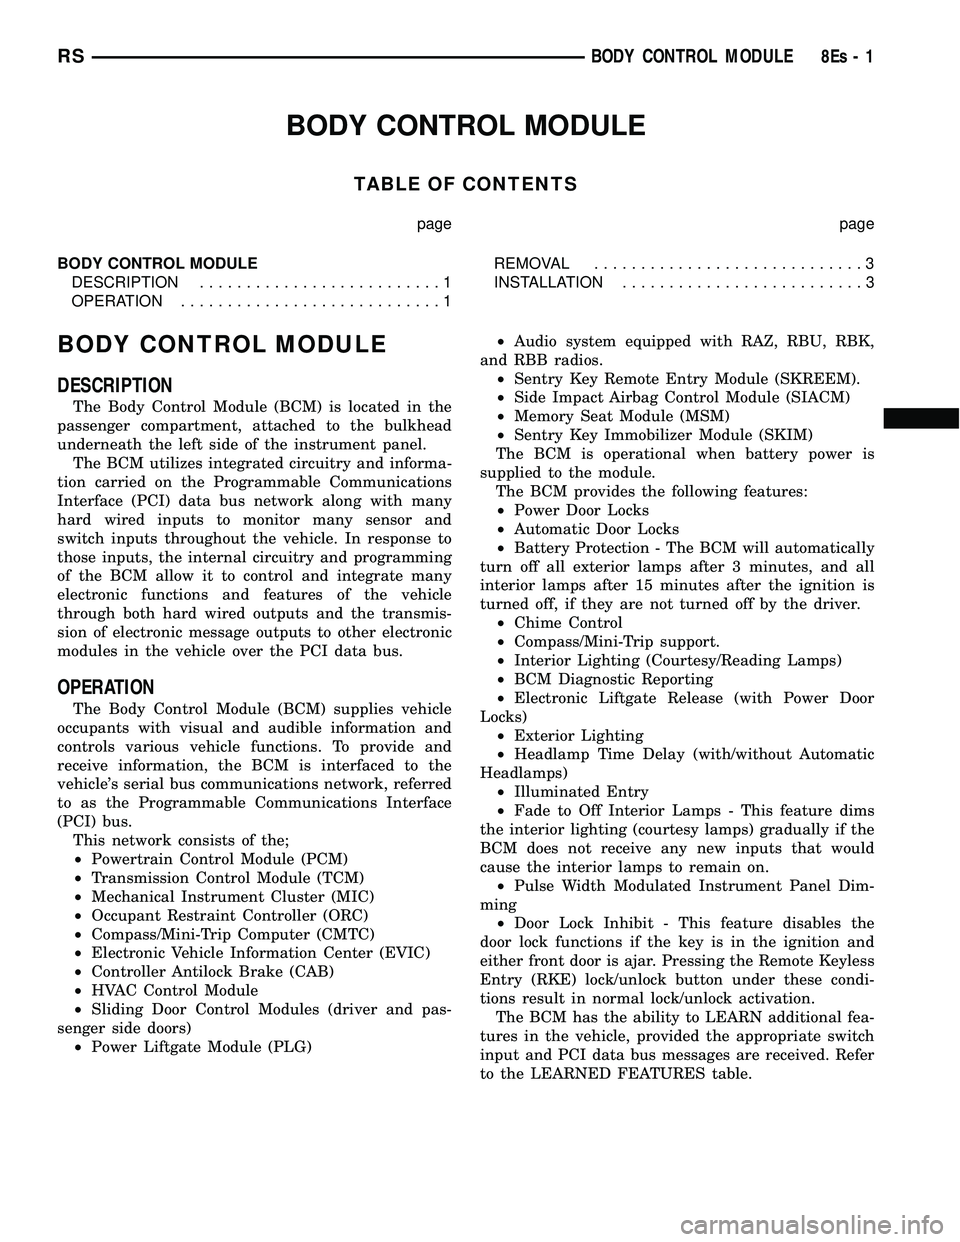 DODGE TOWN AND COUNTRY 2004  Service Manual BODY CONTROL MODULE
TABLE OF CONTENTS
page page
BODY CONTROL MODULE DESCRIPTION ..........................1
OPERATION ............................1 REMOVAL
.............................3
INSTALLATION 